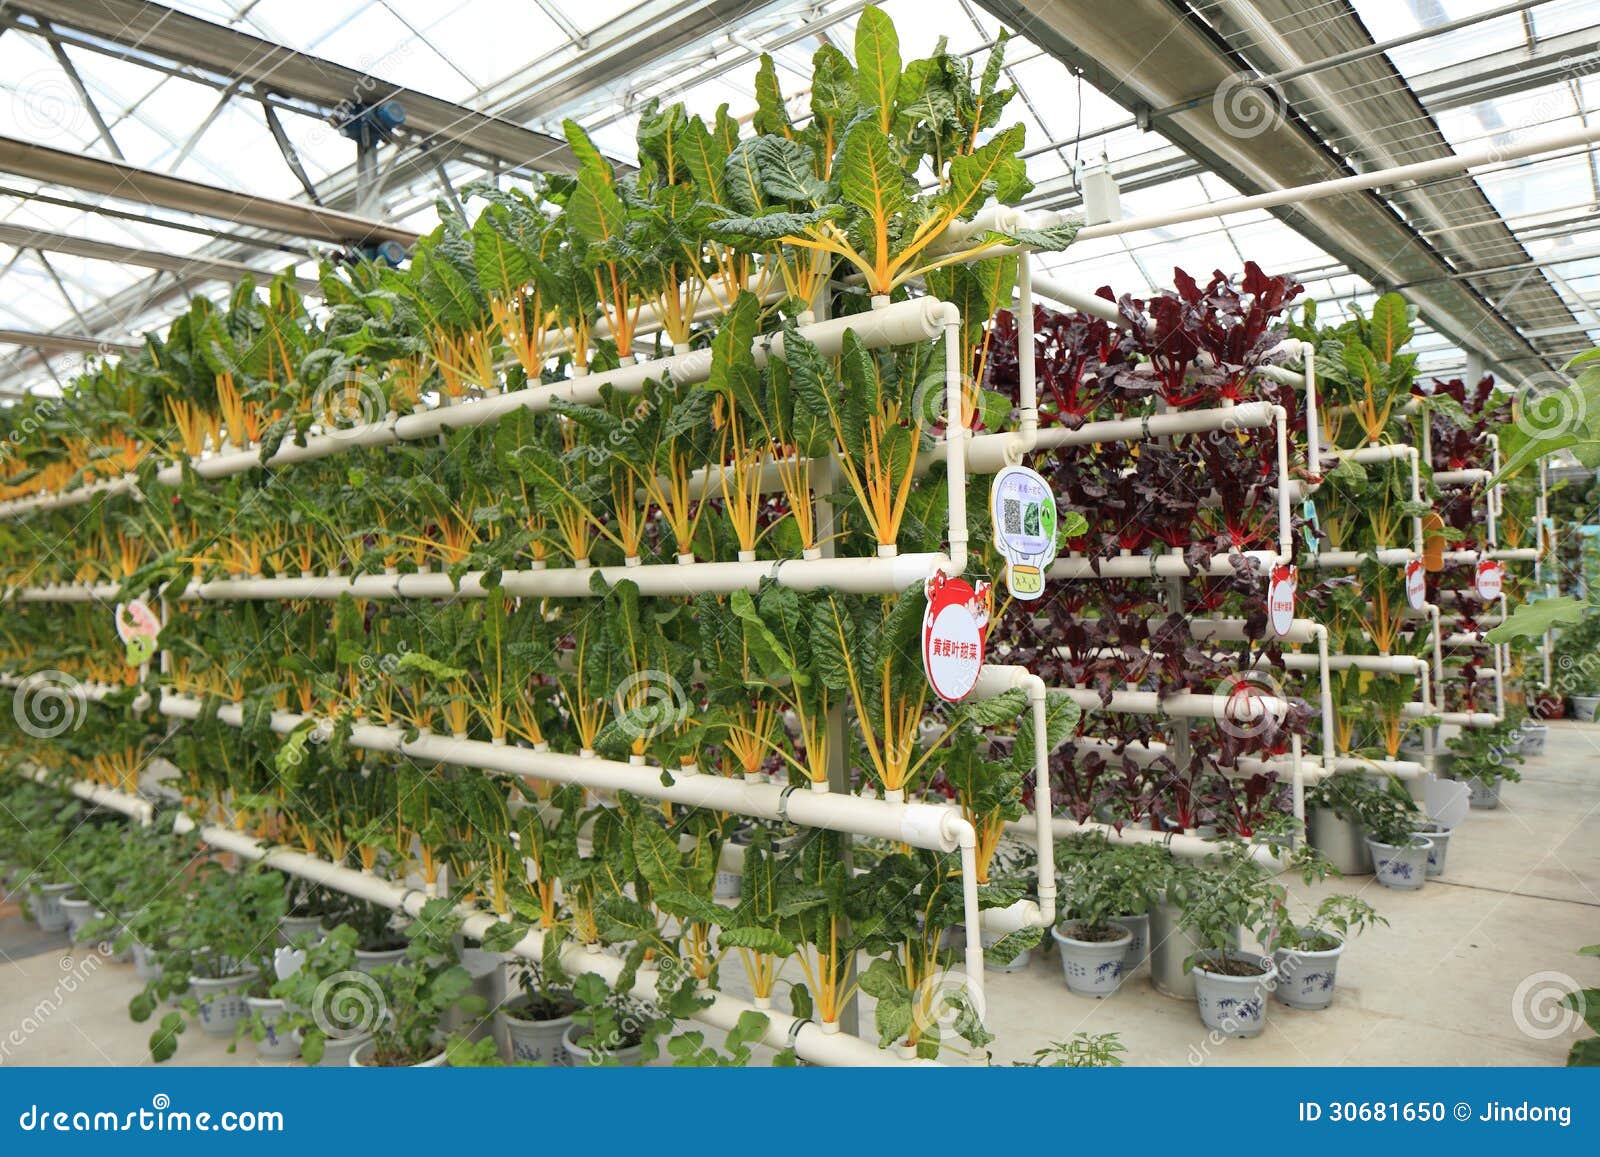 Soilless Cultivation Vegetables Stock Photo - Image: 30681650